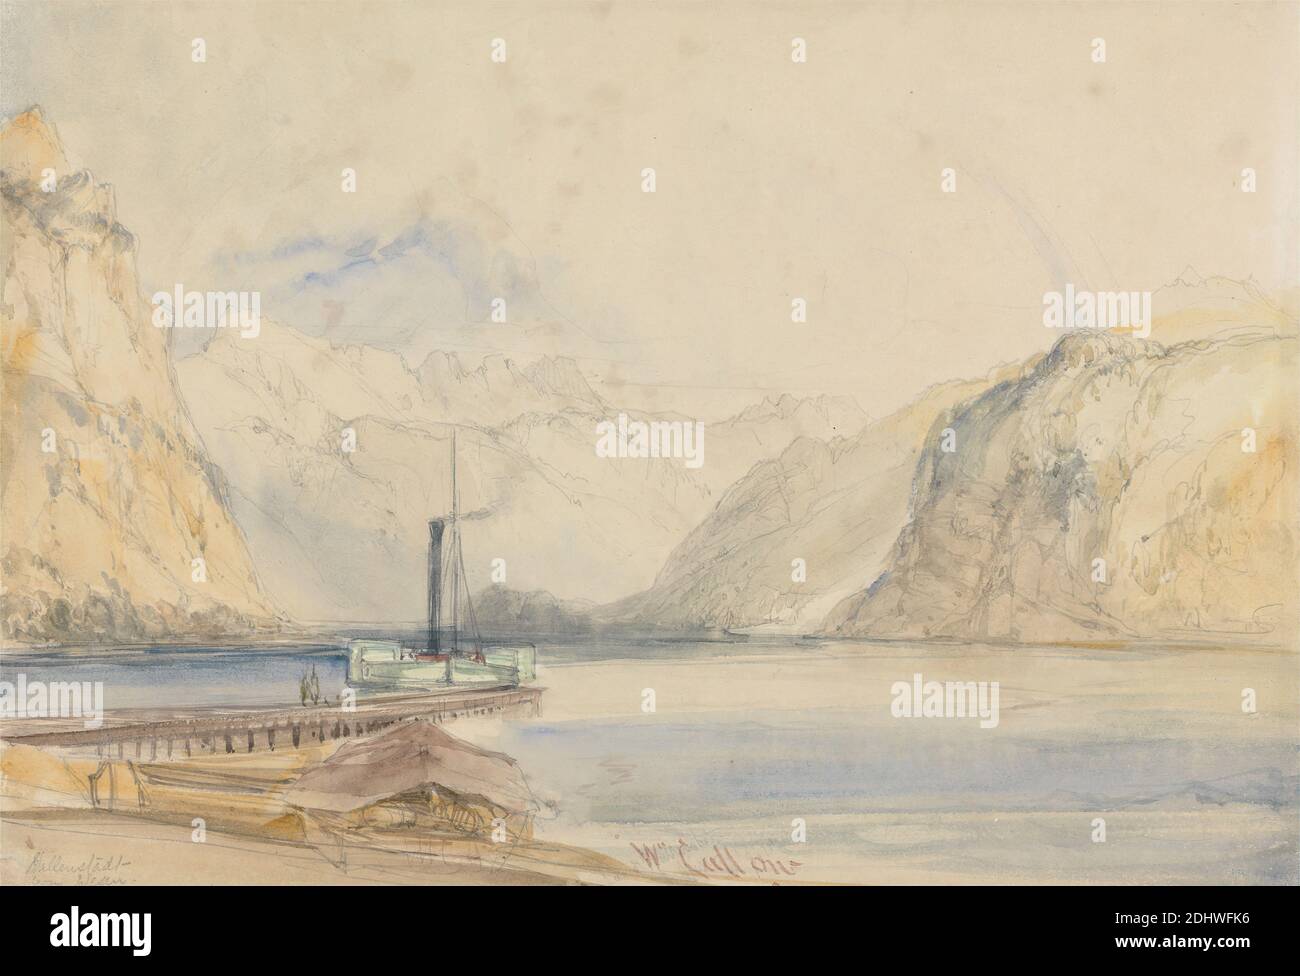 Wallenstadt from Wesen, Switzerland, William Callow, 1812–1908, British, active in France, 1838, Watercolor over graphite on medium, slightly textured, blued white wove paper, Sheet: 9 3/4 x 14 1/4 inches (24.8 x 36.2 cm), boats, lake, landscape, marine art, meteorology, mountains, pier (marine landing), rainbow, science, steamboat, Europe, St. Gallen, Switzerland, Walensee, Walenstadt Stock Photo